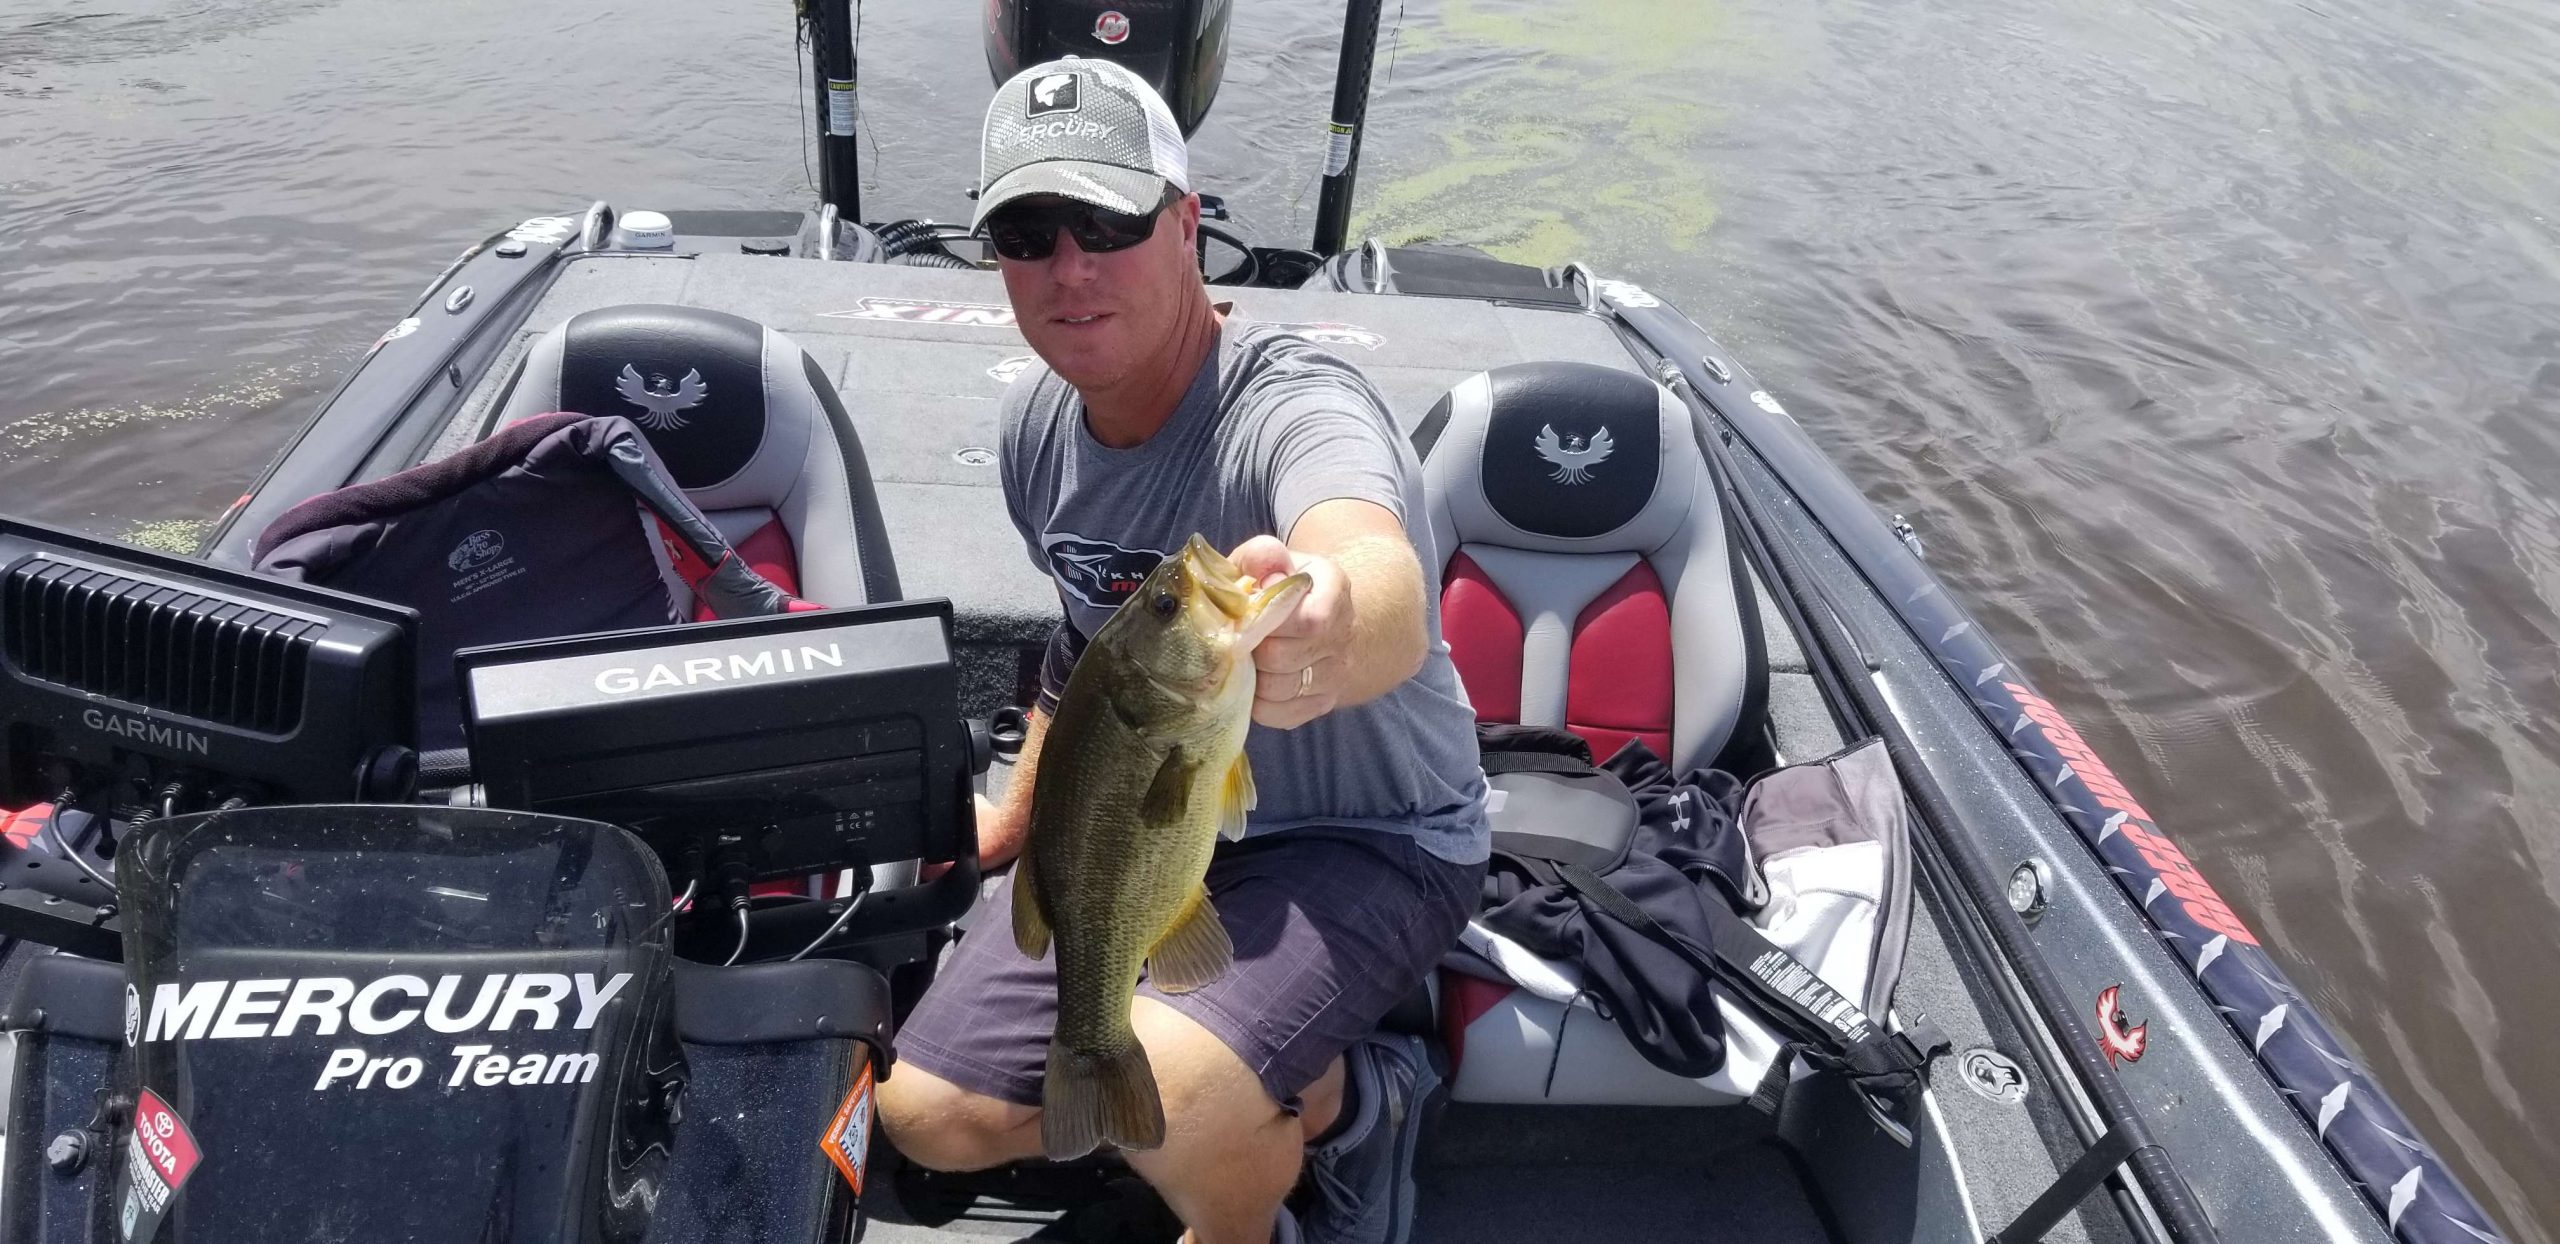 Greg Vinson continues to cull up by ounces. Finding 3-pound class fish have been tough today.